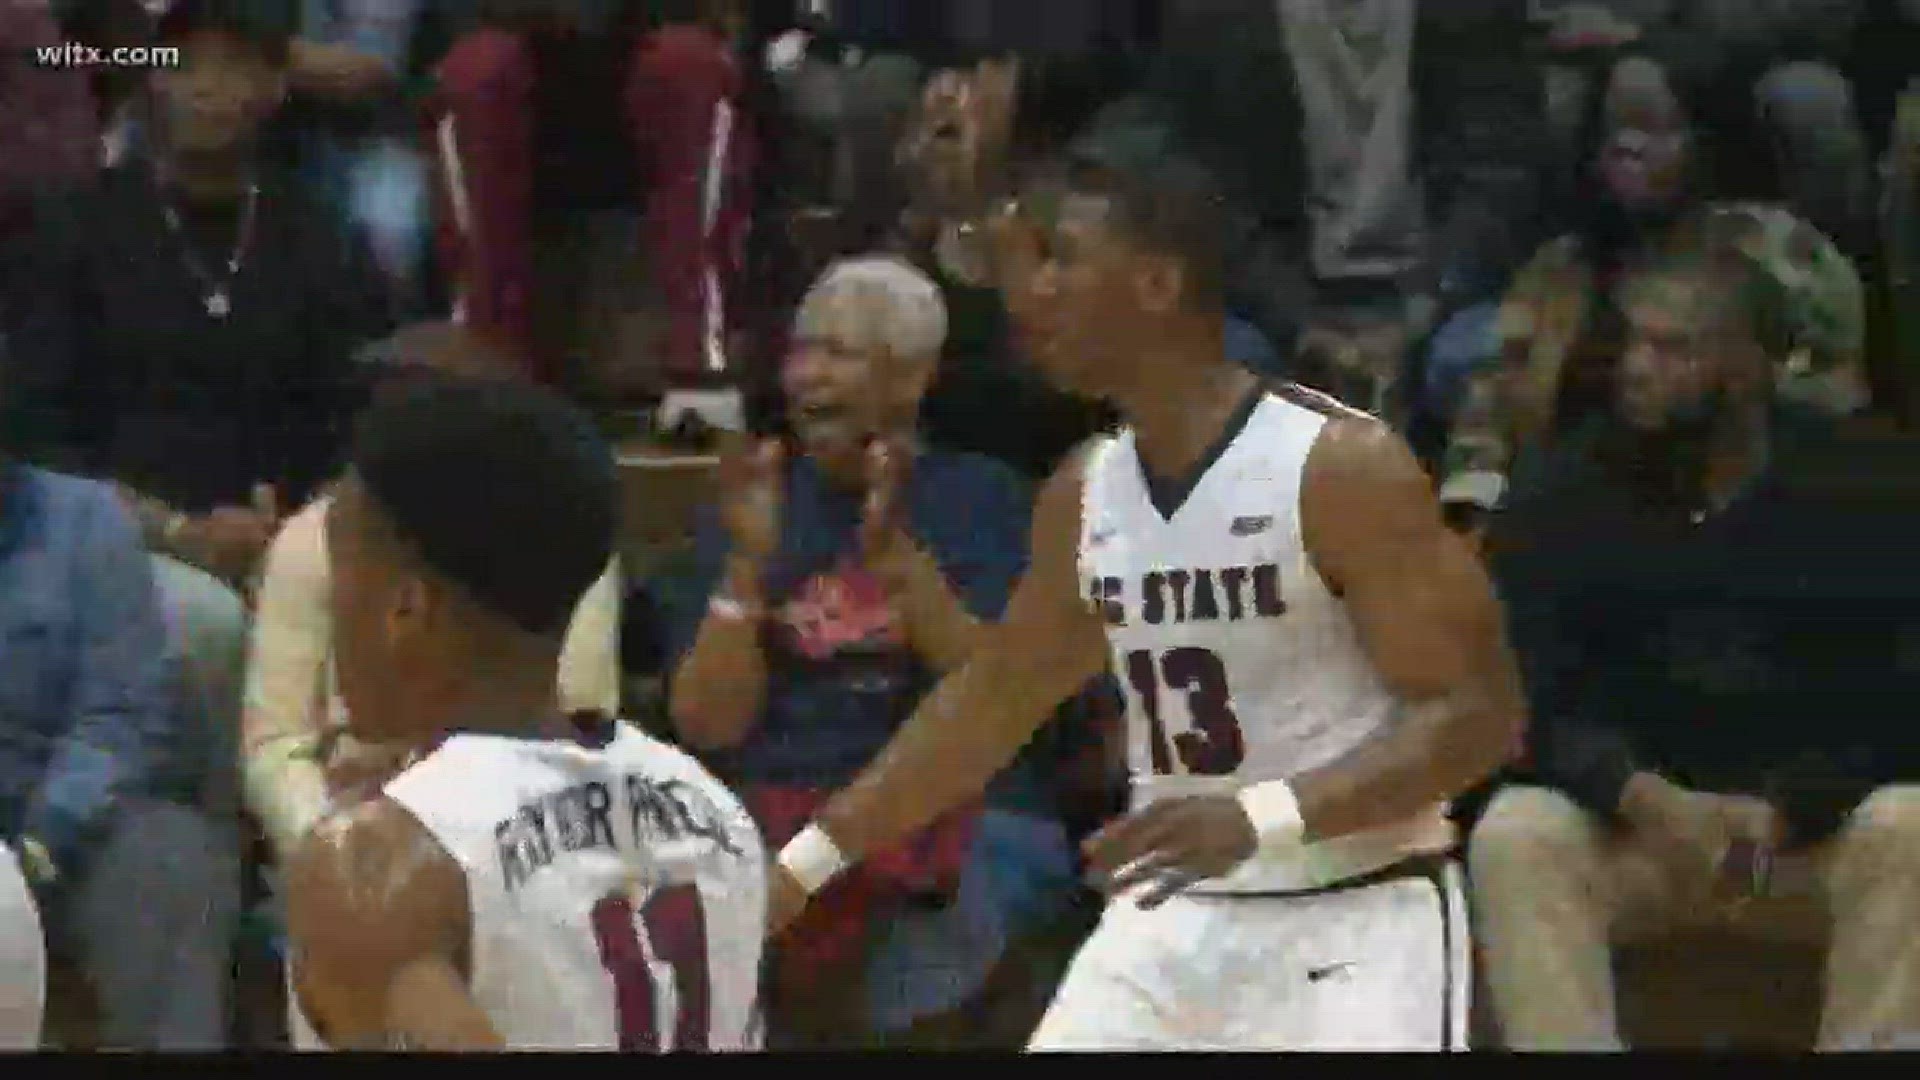 South Carolina State plays perhaps its best game of the season, defeating North Carolina A&T 90-85. The Aggies were tied for the MEAC lead coming in to Saturday's contest.